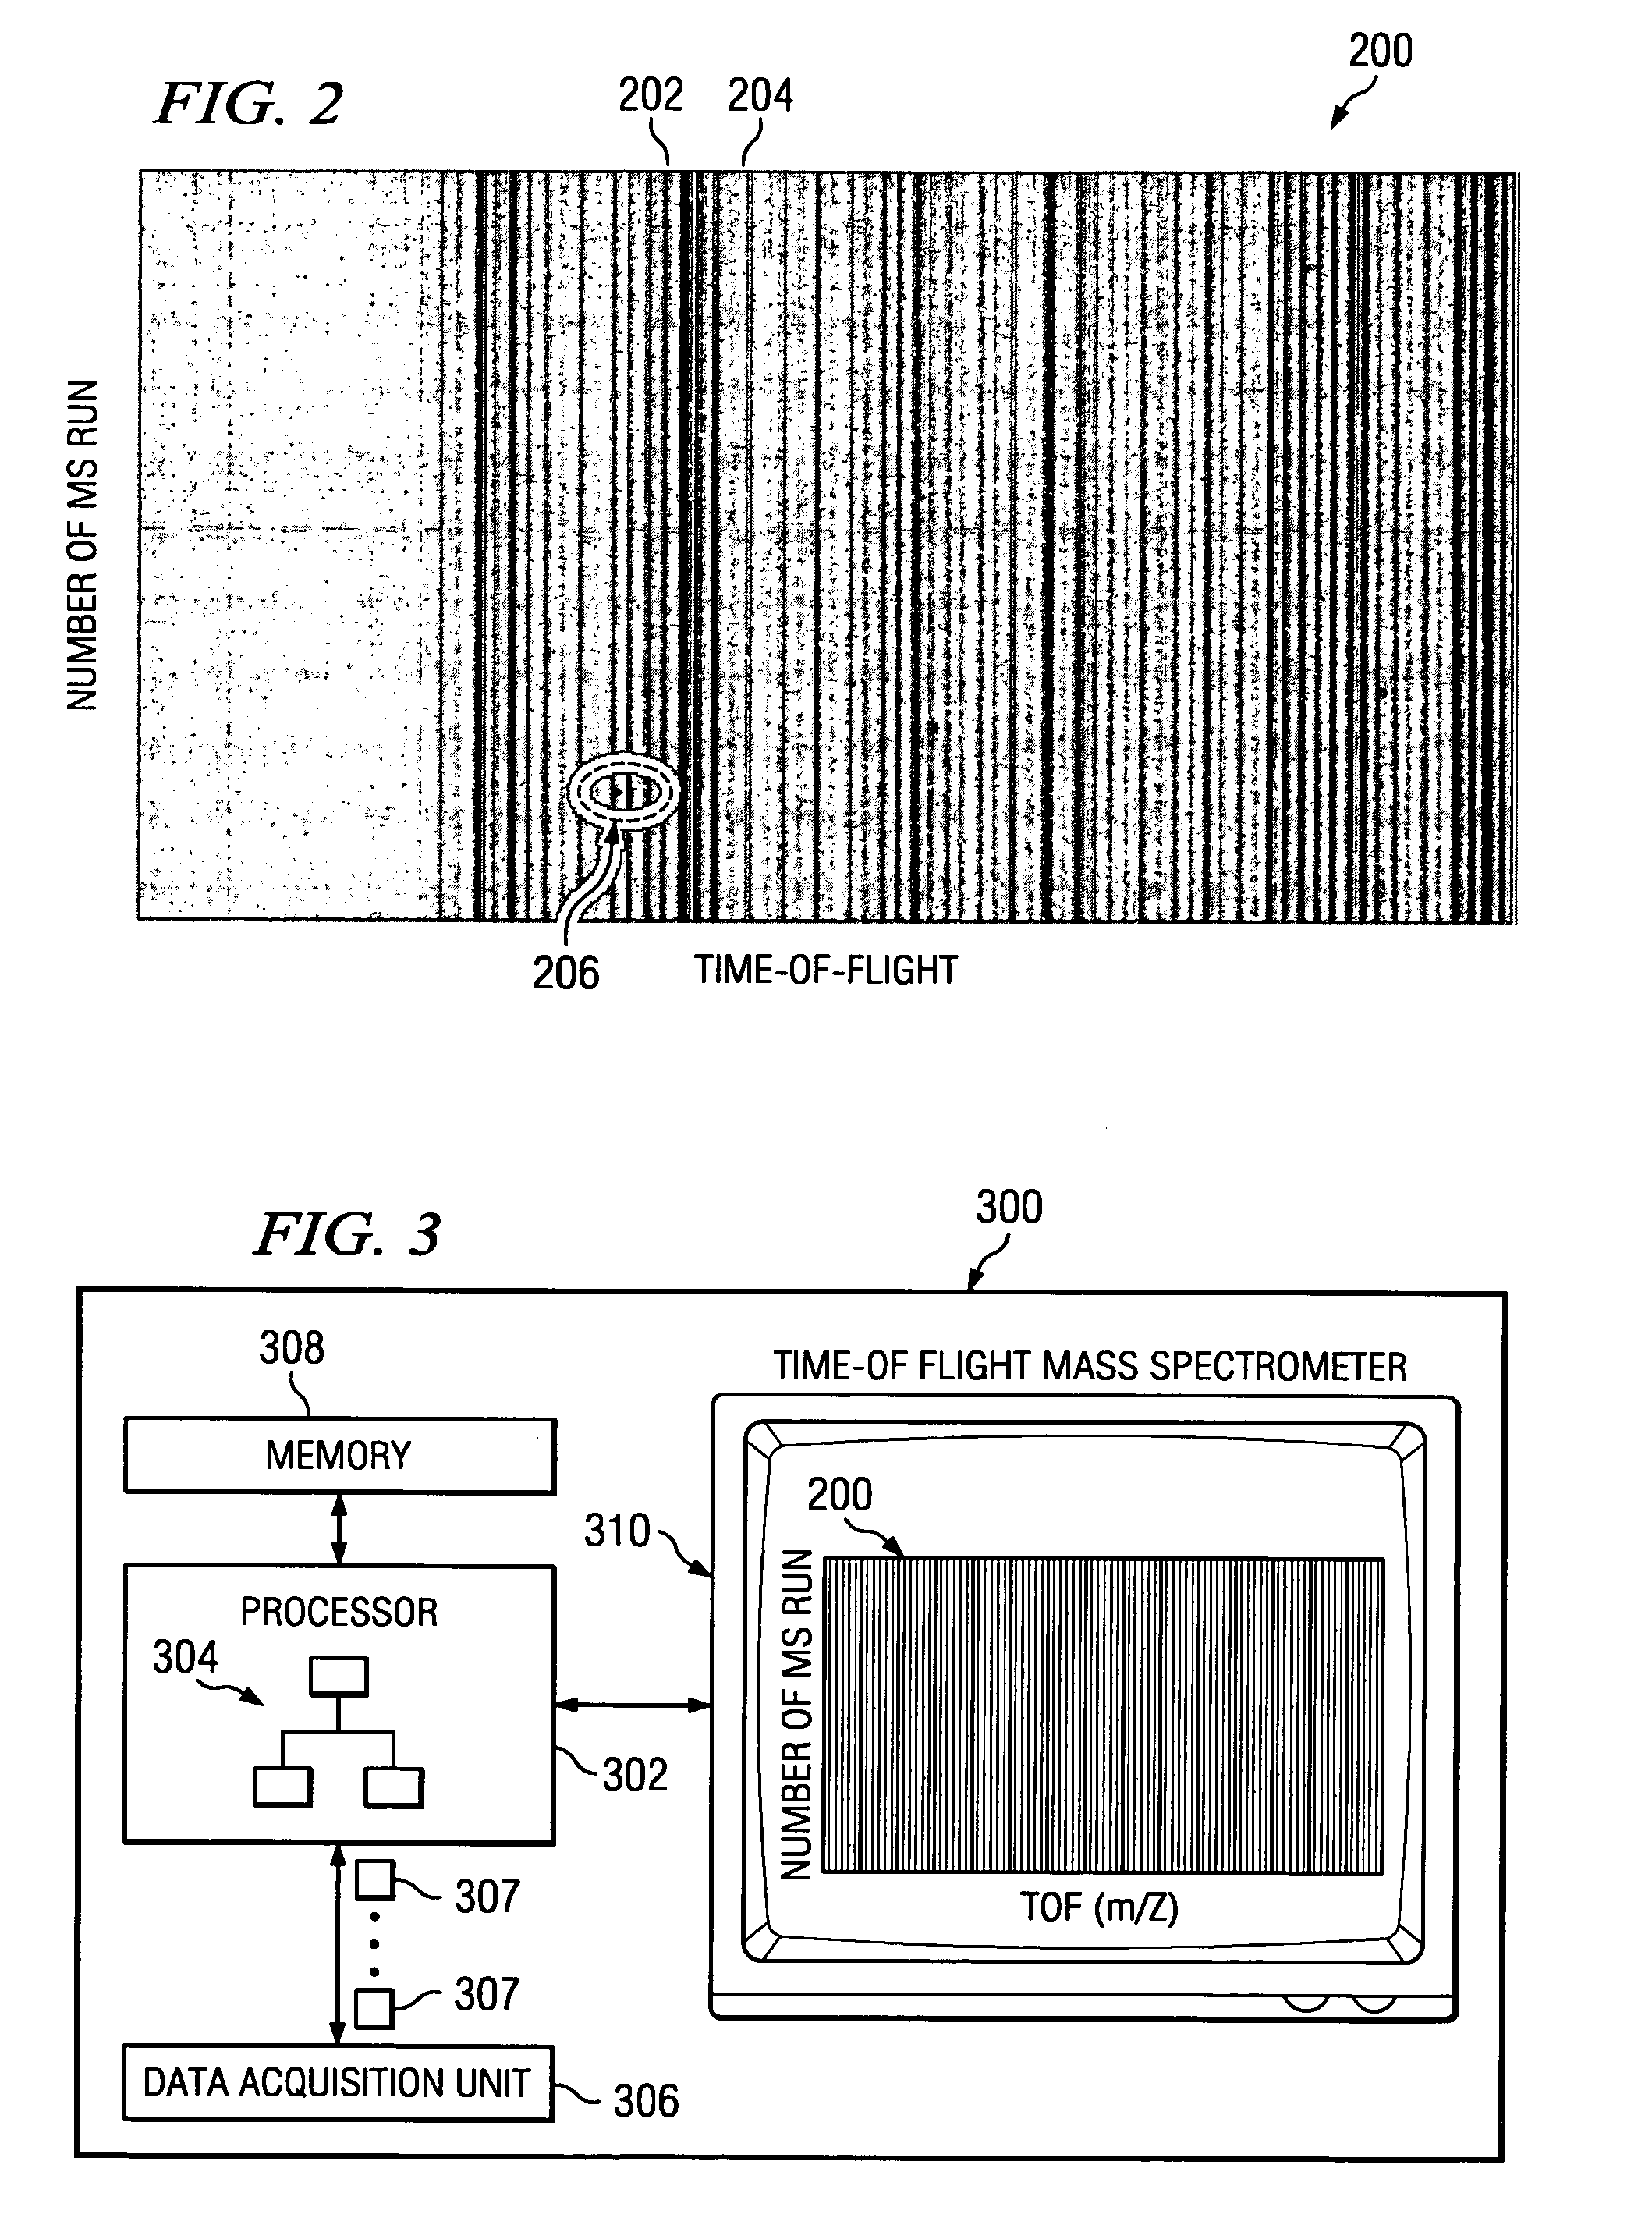 Image processing of mass spectrometry data for using at multiple resolutions